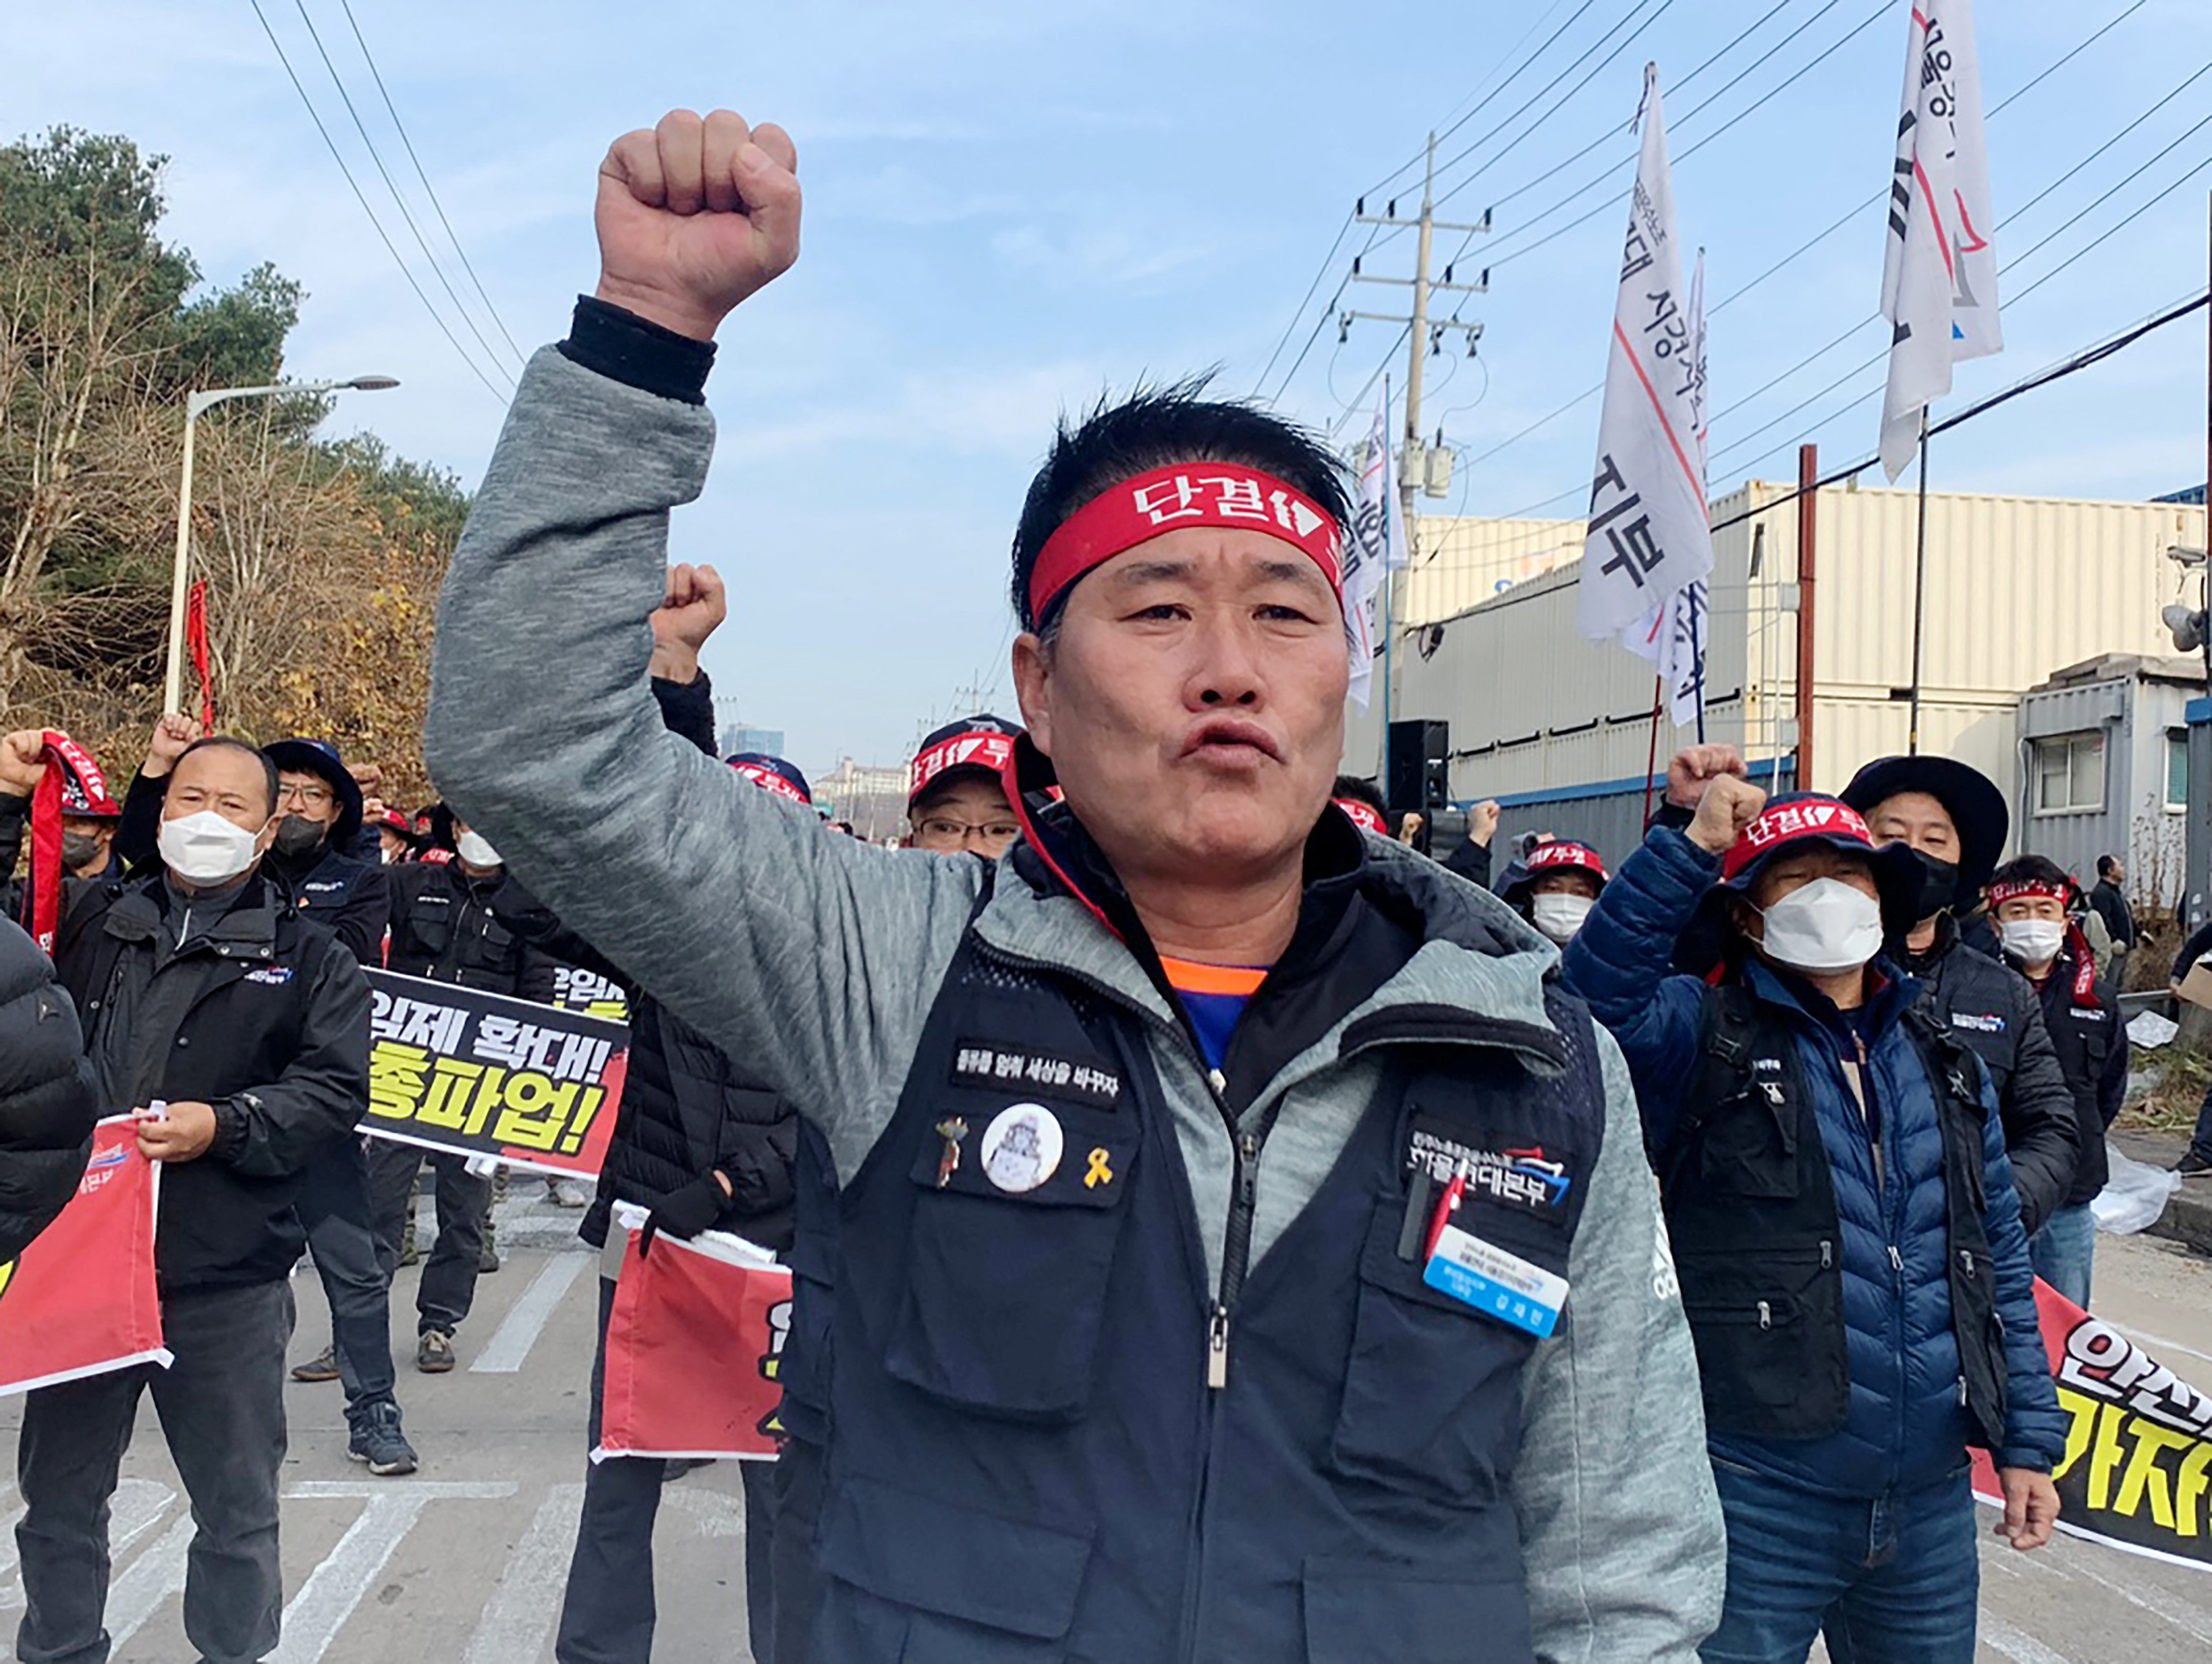 Unionized truckers shout slogans during their rally as they kick off their strike in front of transport hub Uiwang